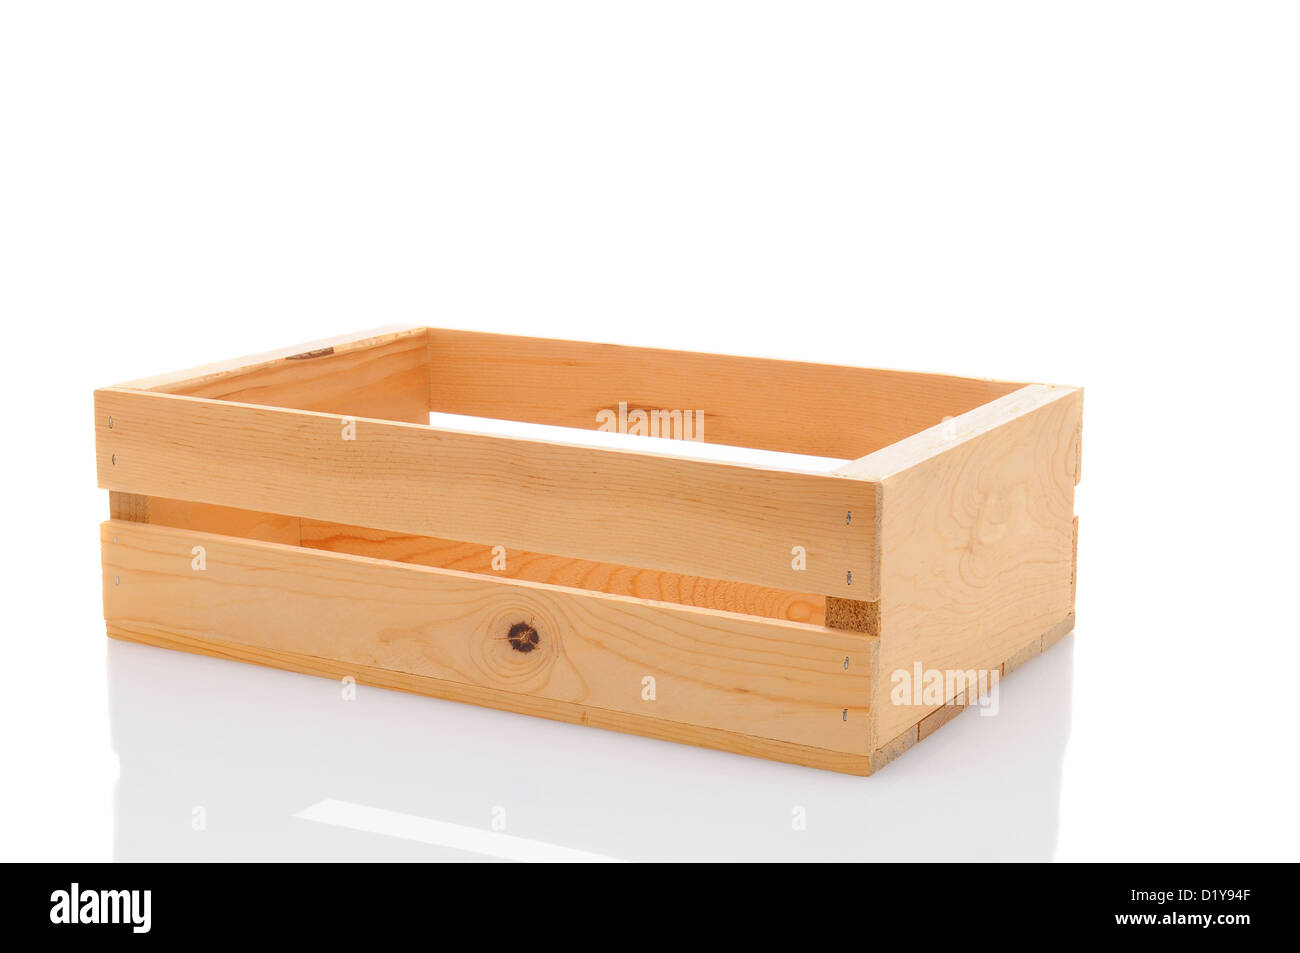 Closeup of an empty wooden shipping crate isolated on white. Stock Photo